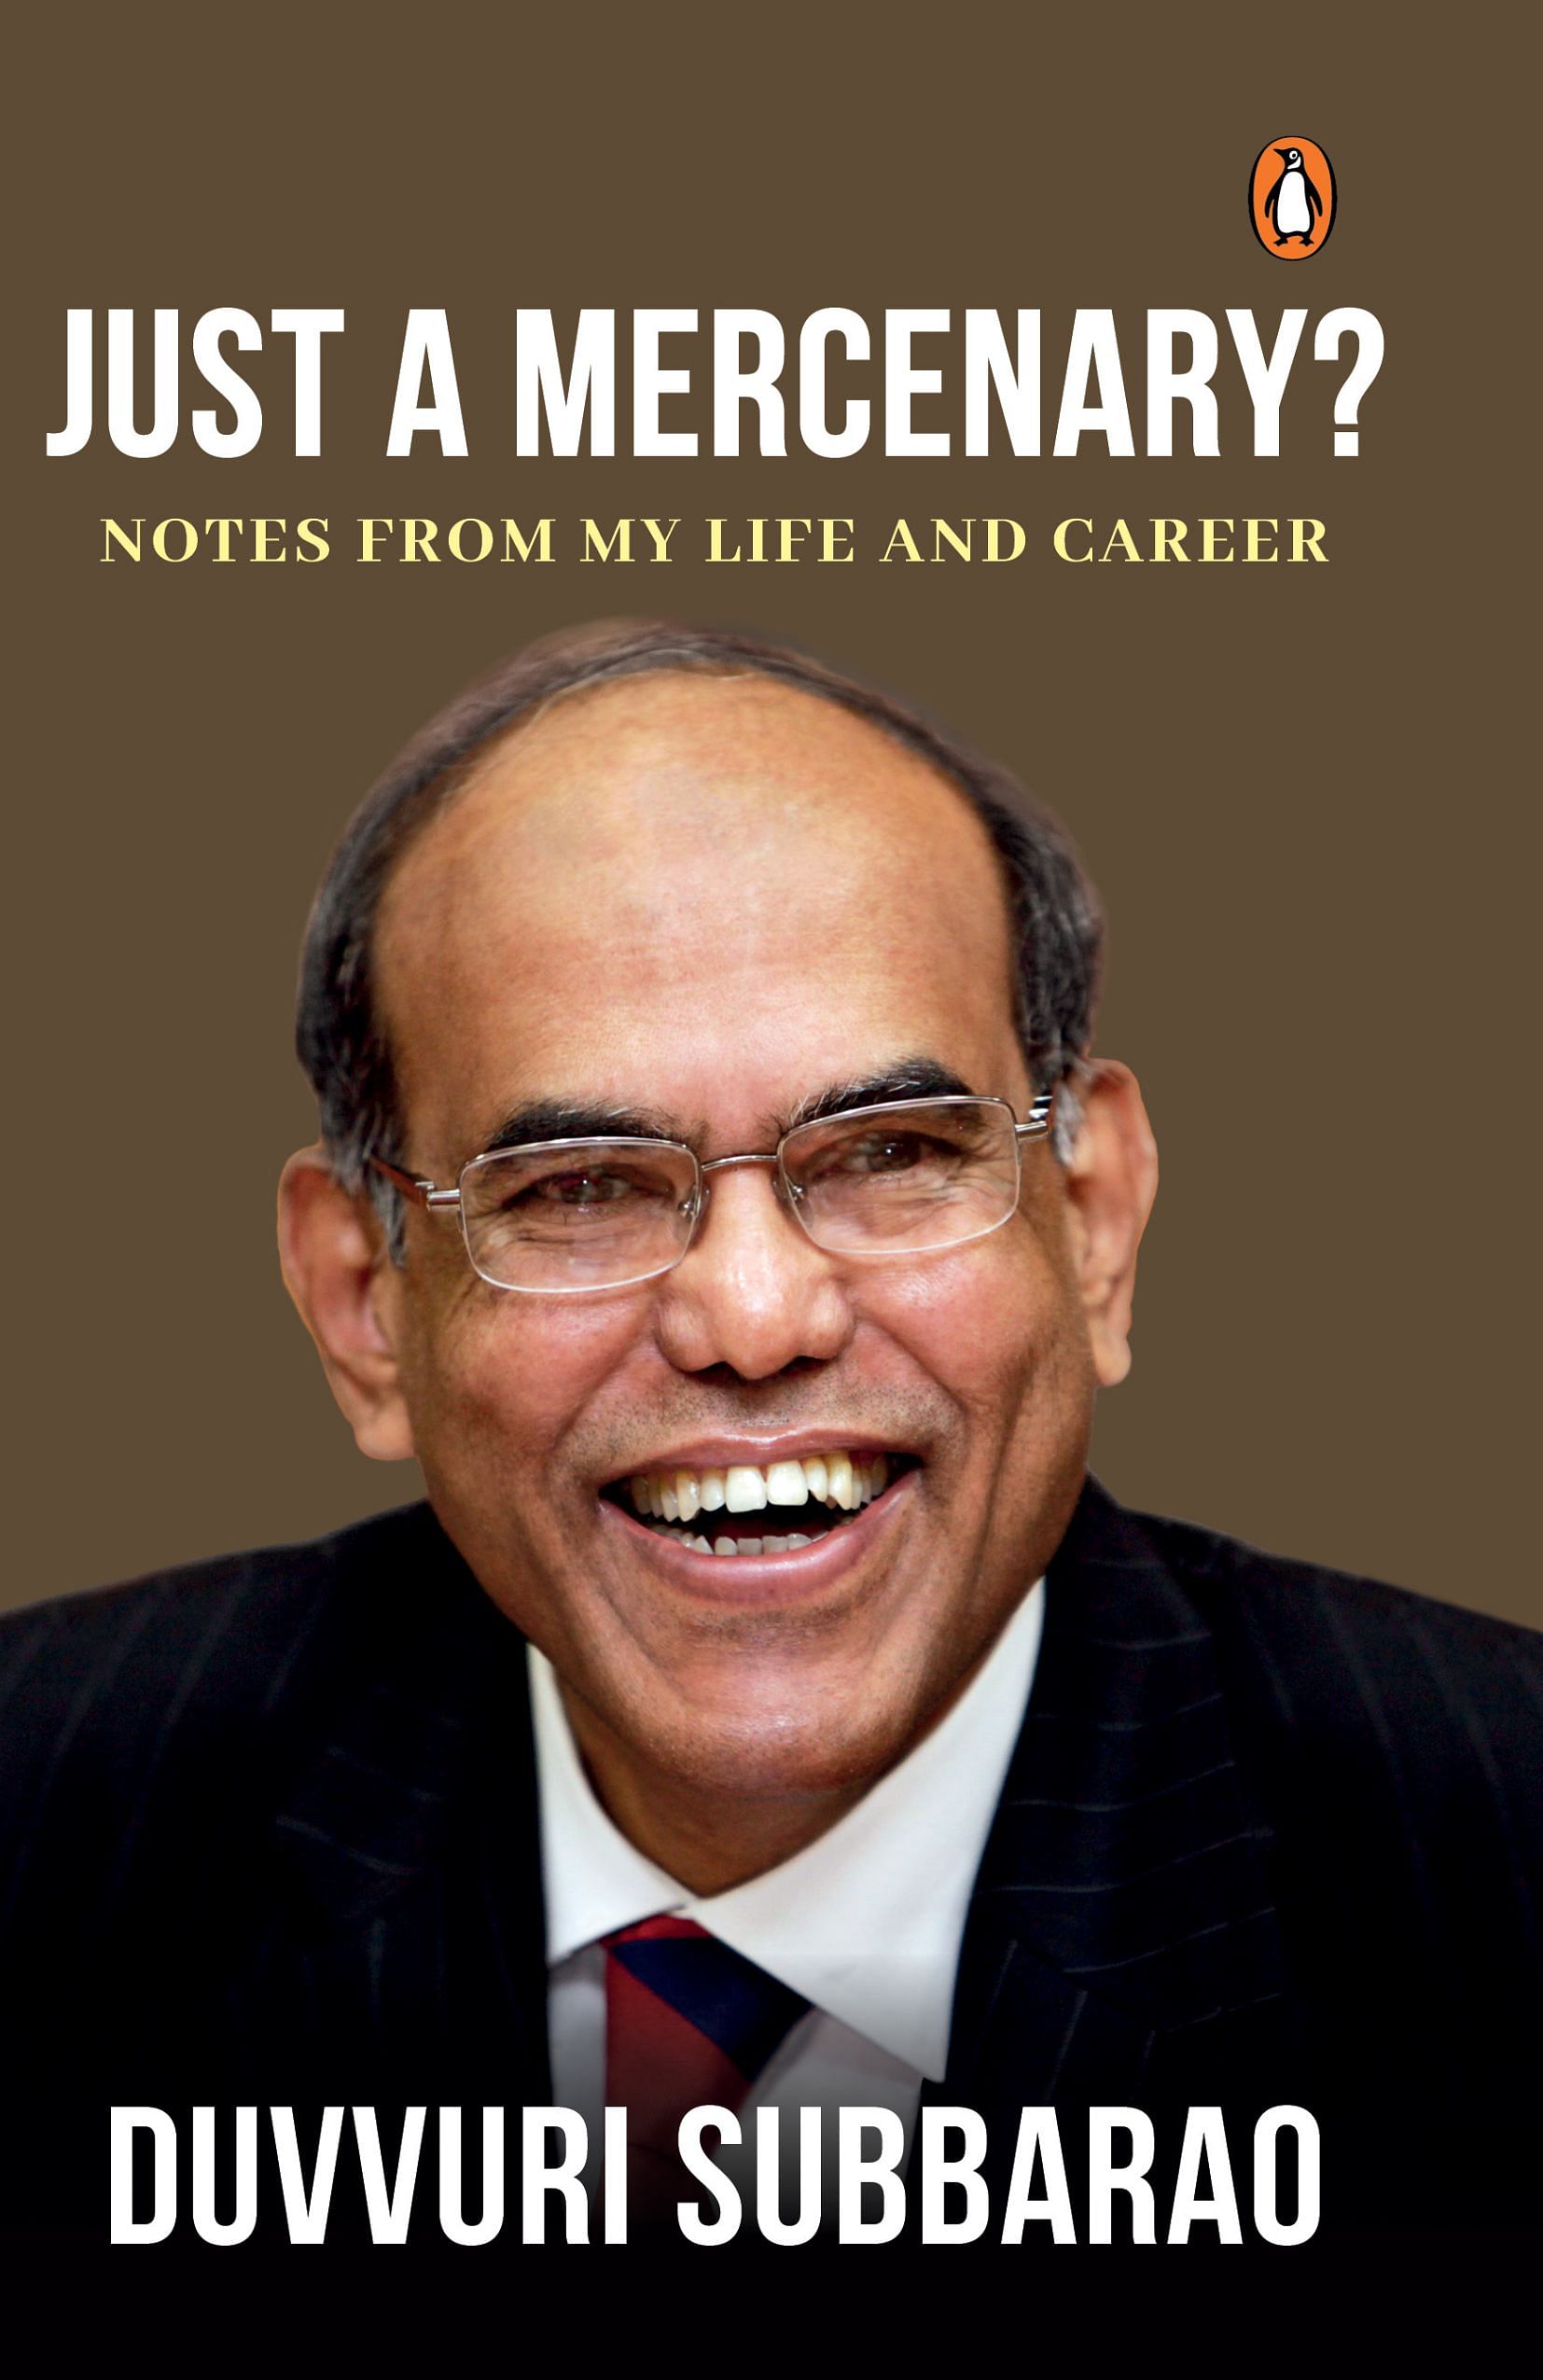 d subbarao’s advice to raghuram rajan—concentrate on lunch menus not interest rates